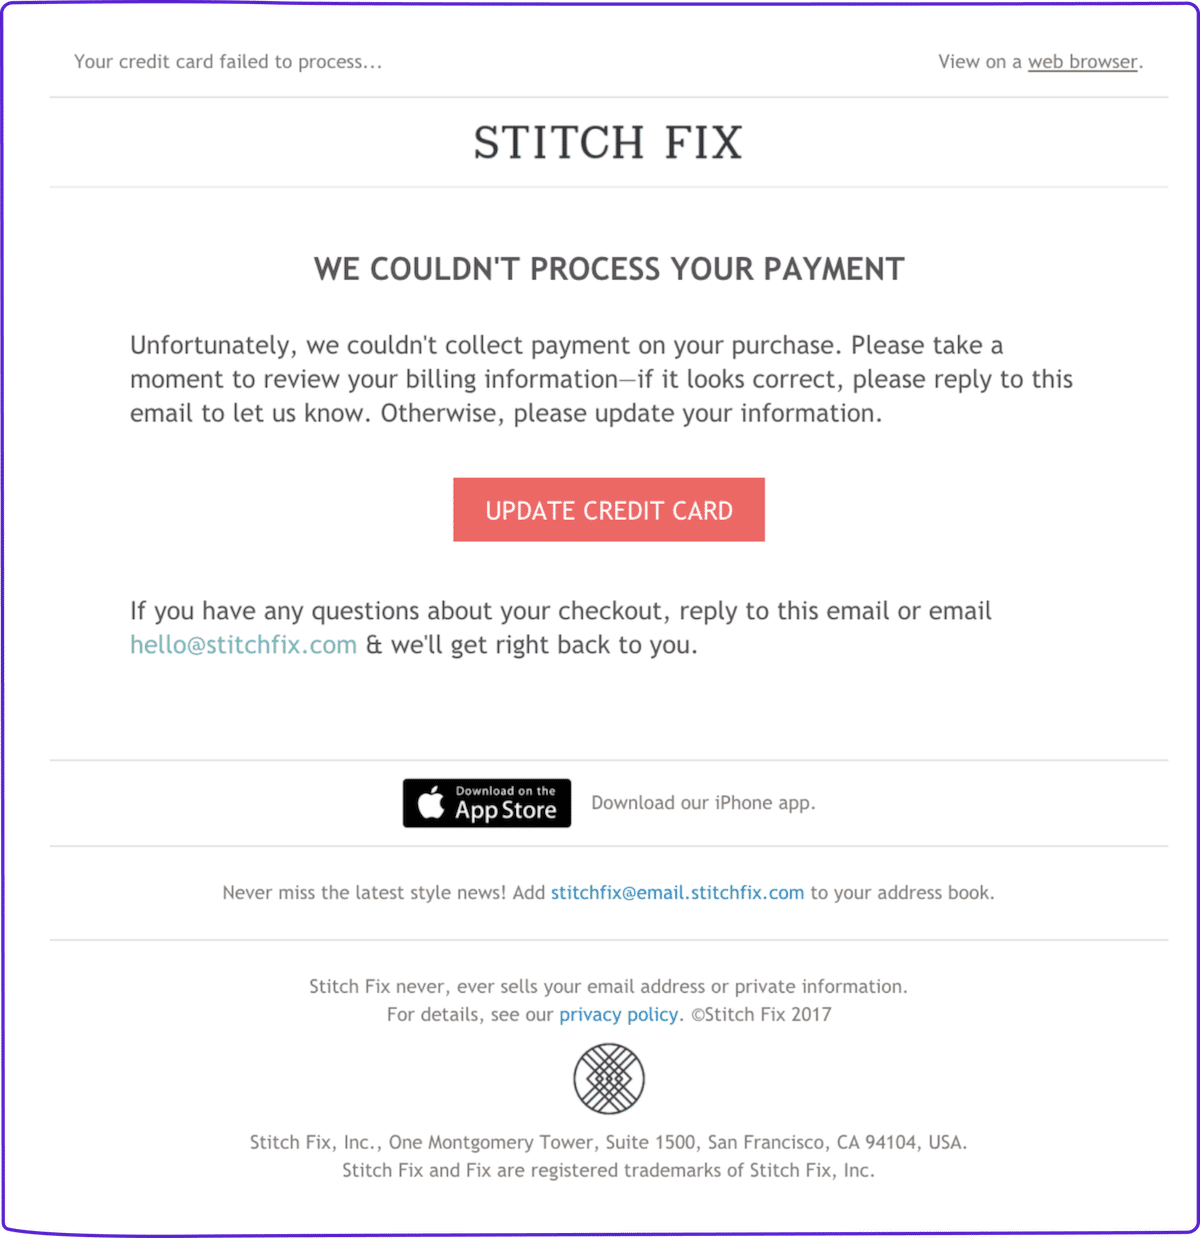 Dunning email example: Stitch Fix